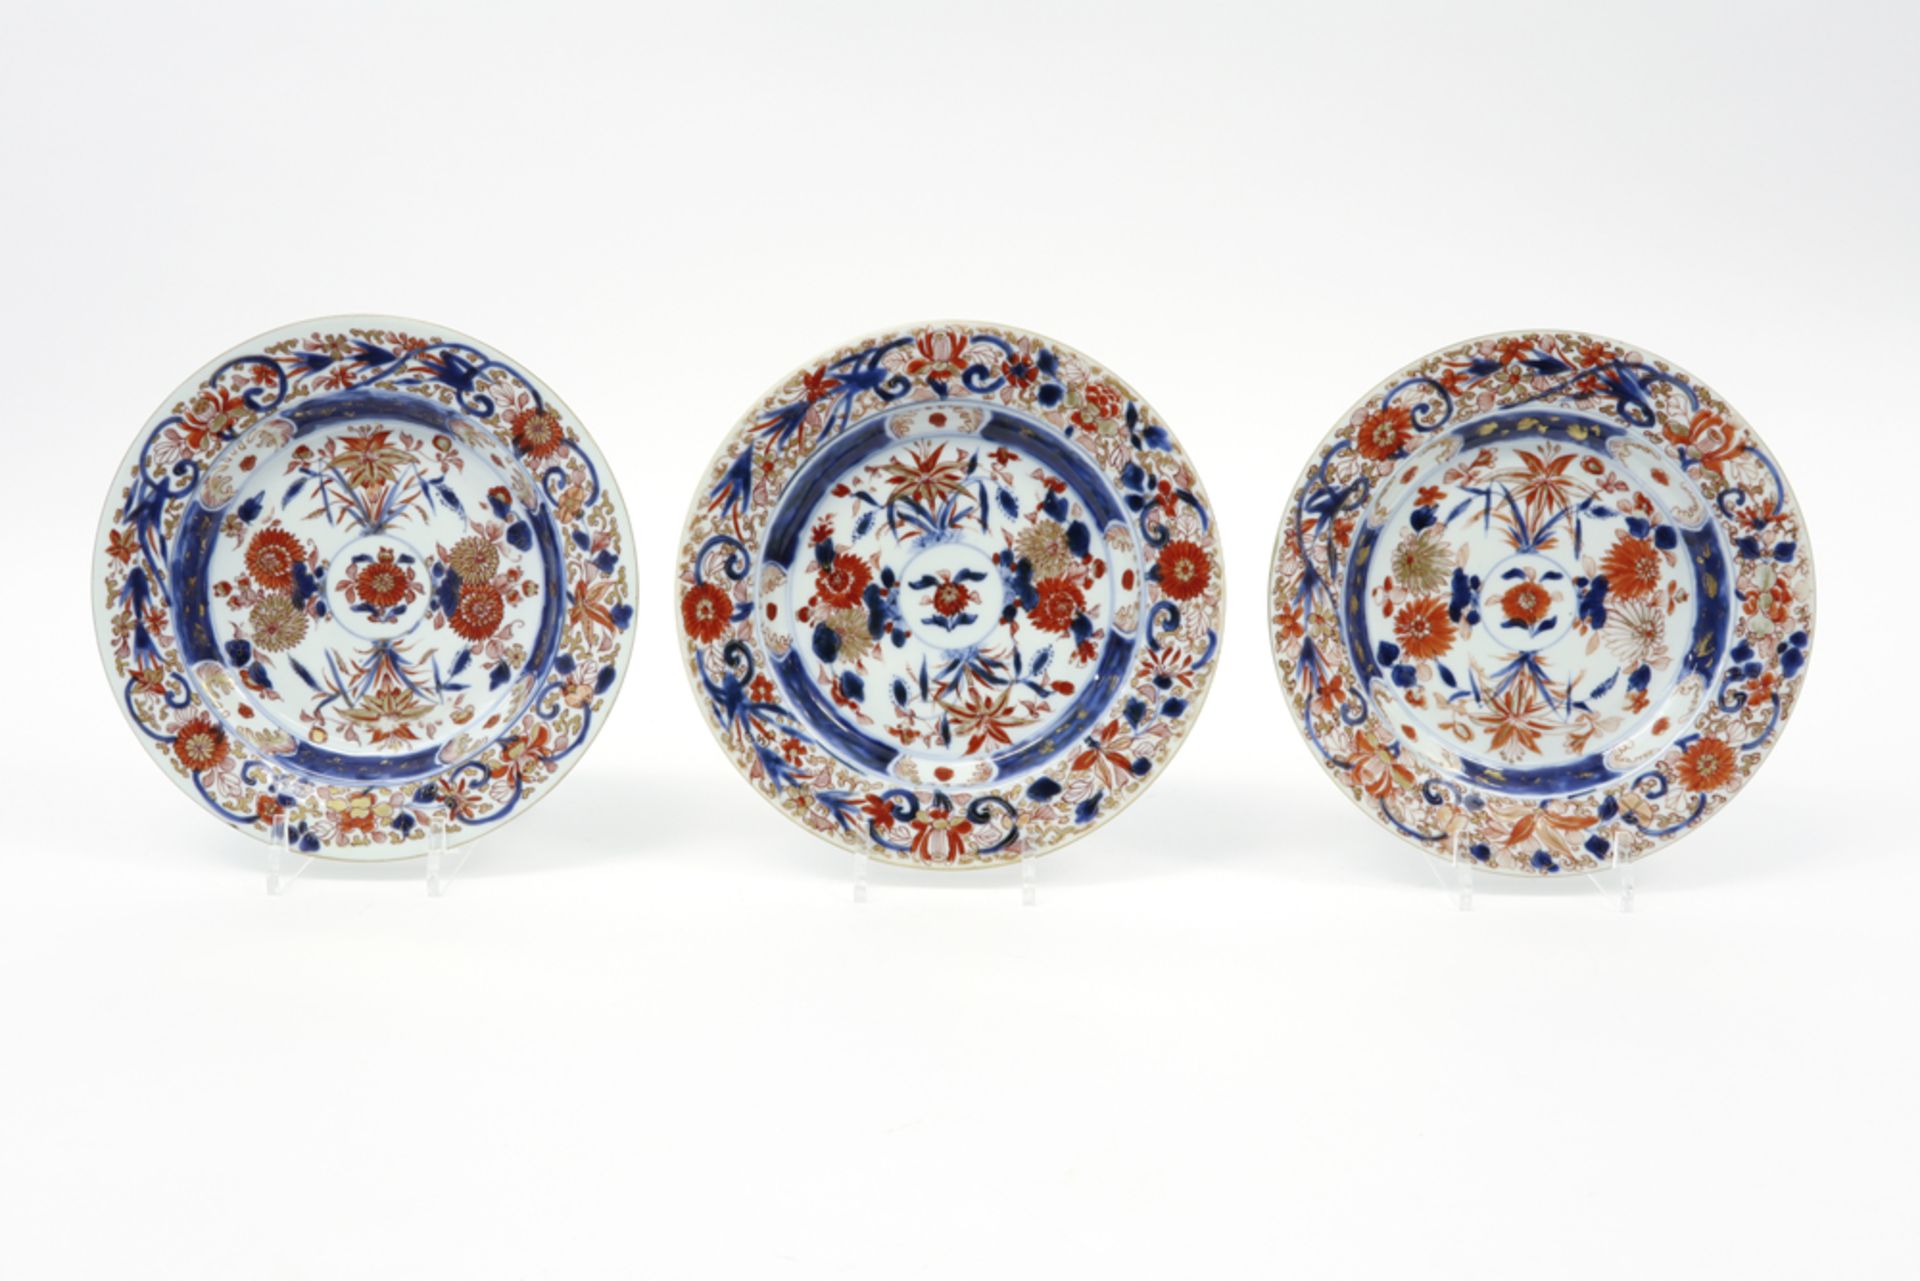 series of three small 18th Cent. Chinese plates in porcelain with vegetal Imari decor || Serie van